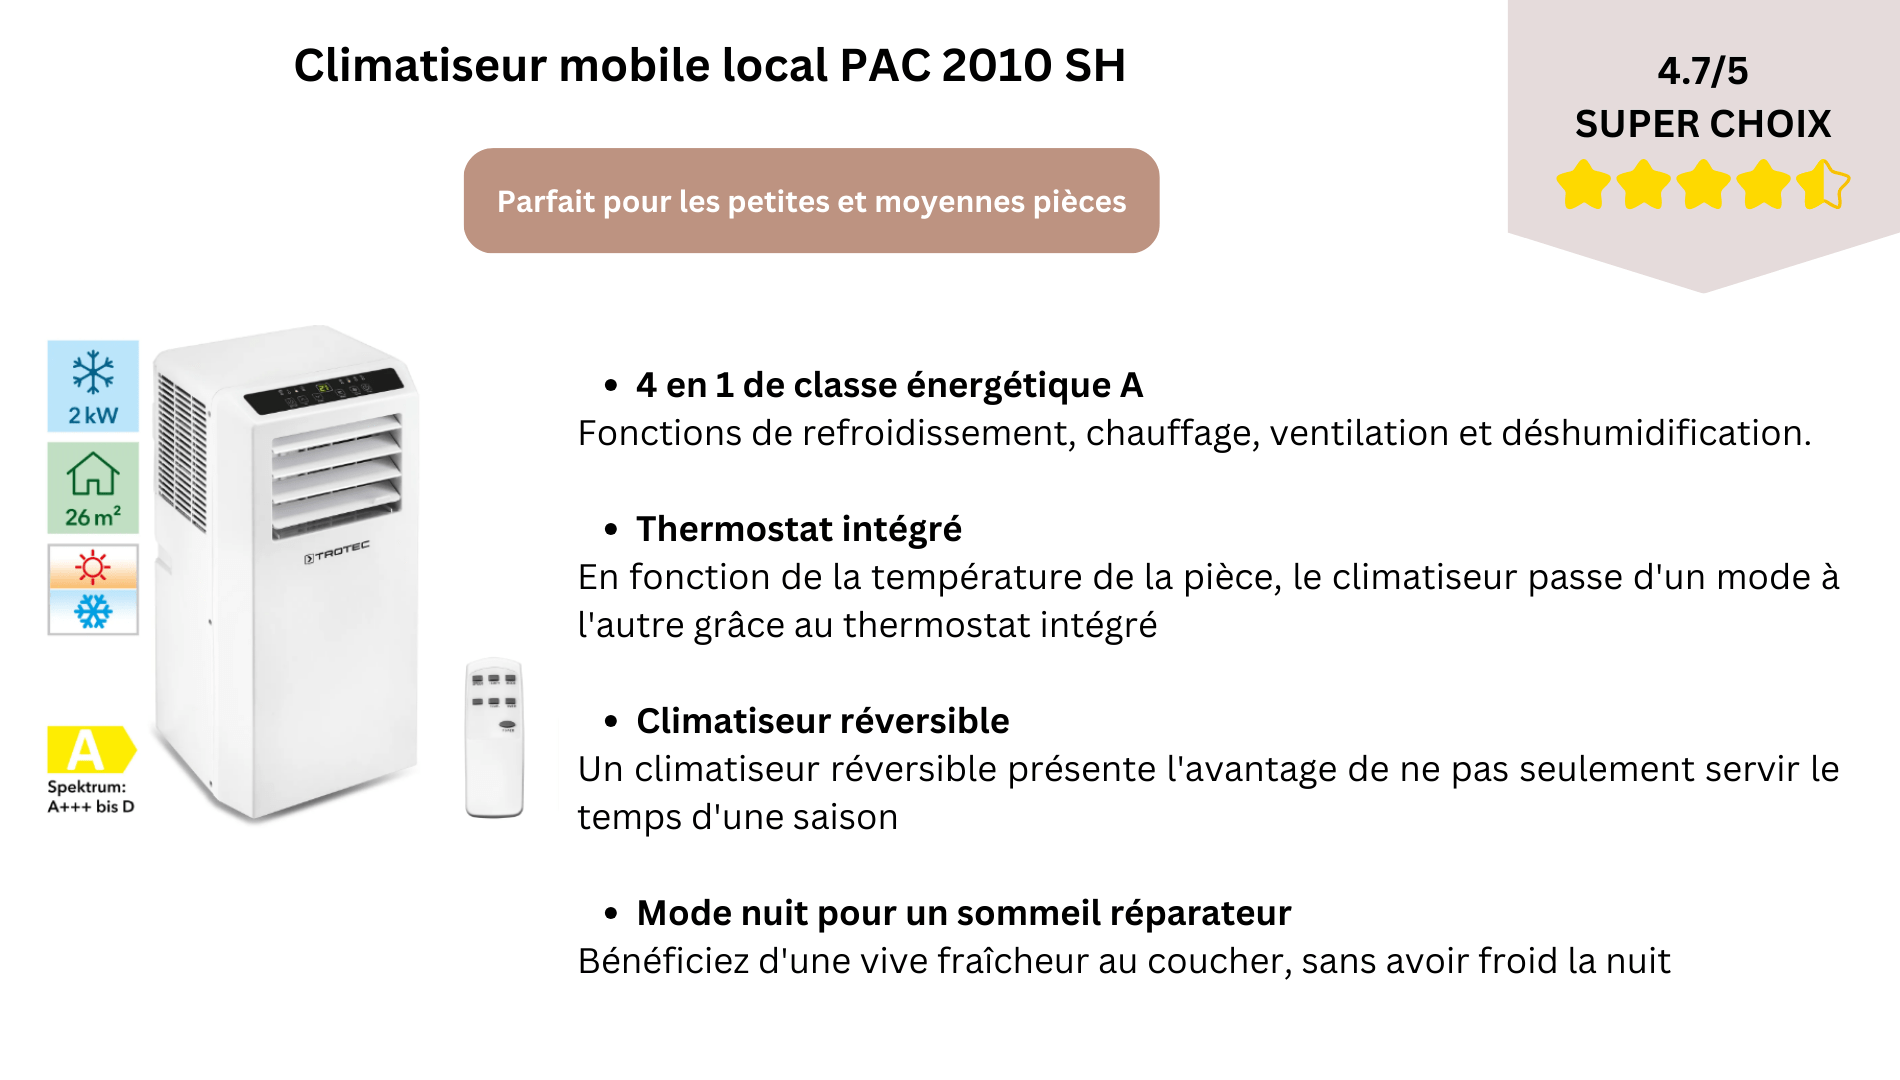 Climatiseur mobile local PAC 2010 SH